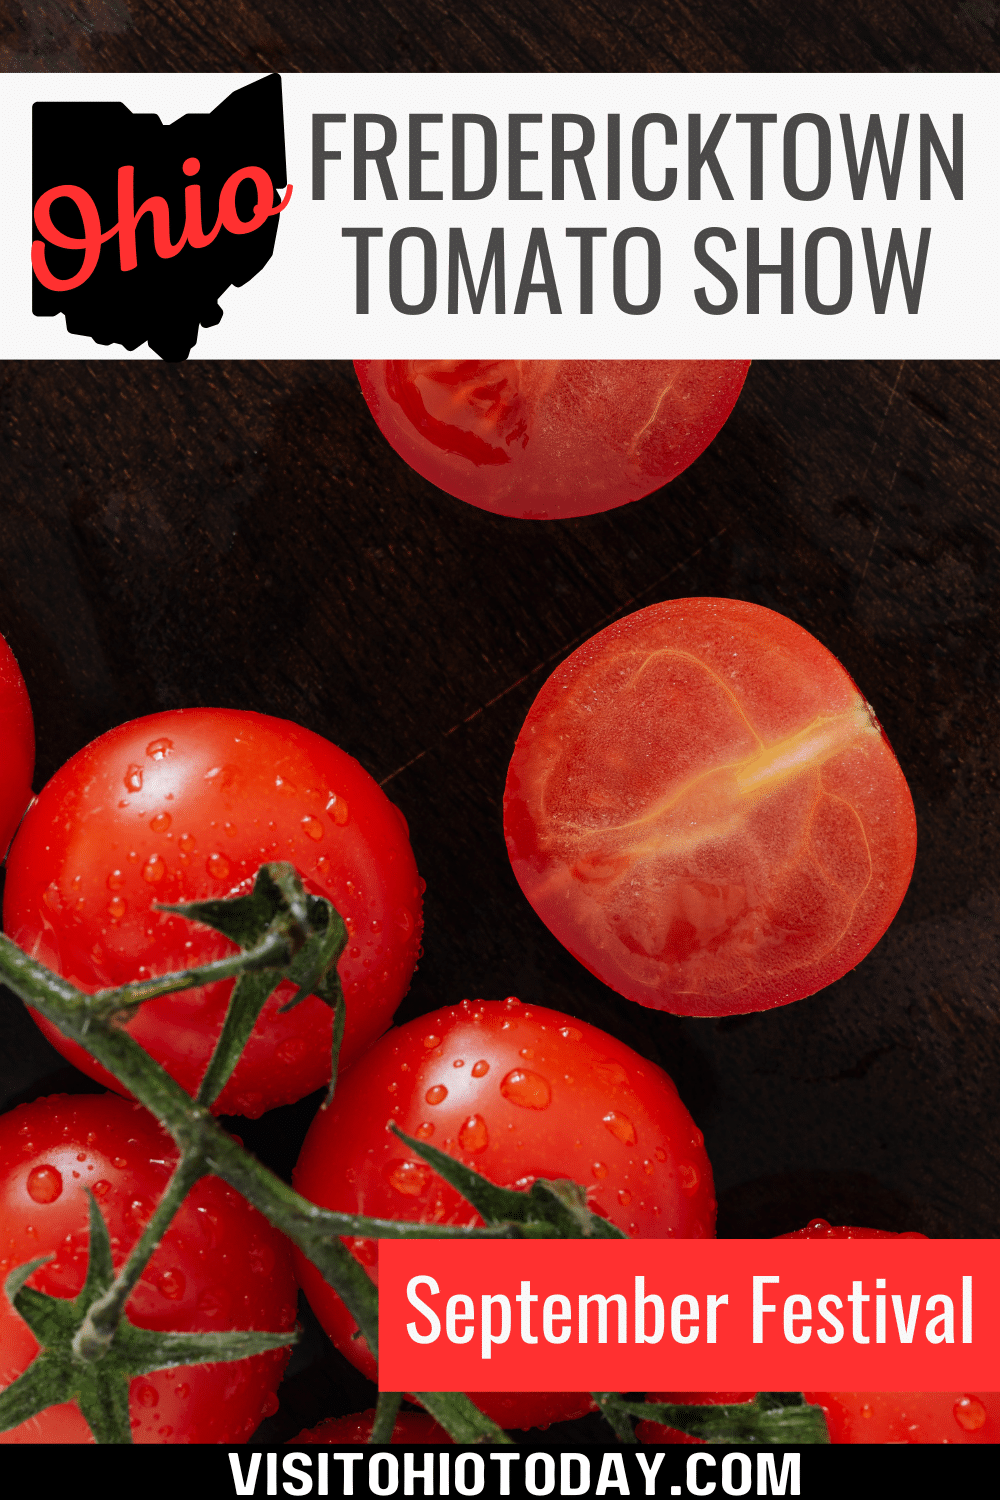 Fredericktown Tomato Show is an annual street fair that is held the first Wednesday through Saturday after Labor Day each year.